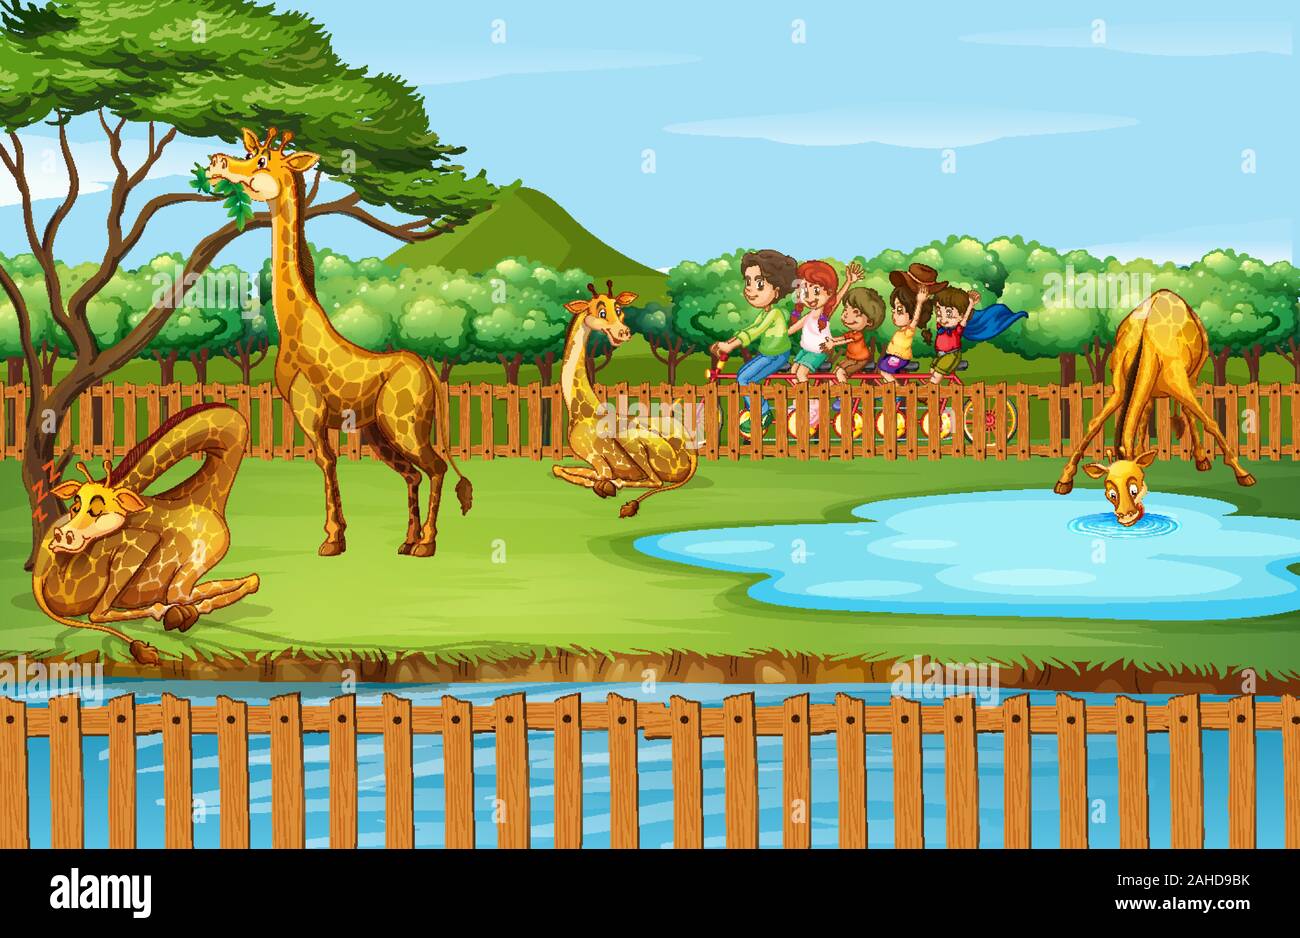 Scene with giraffes and people at the zoo illustration Stock Vector